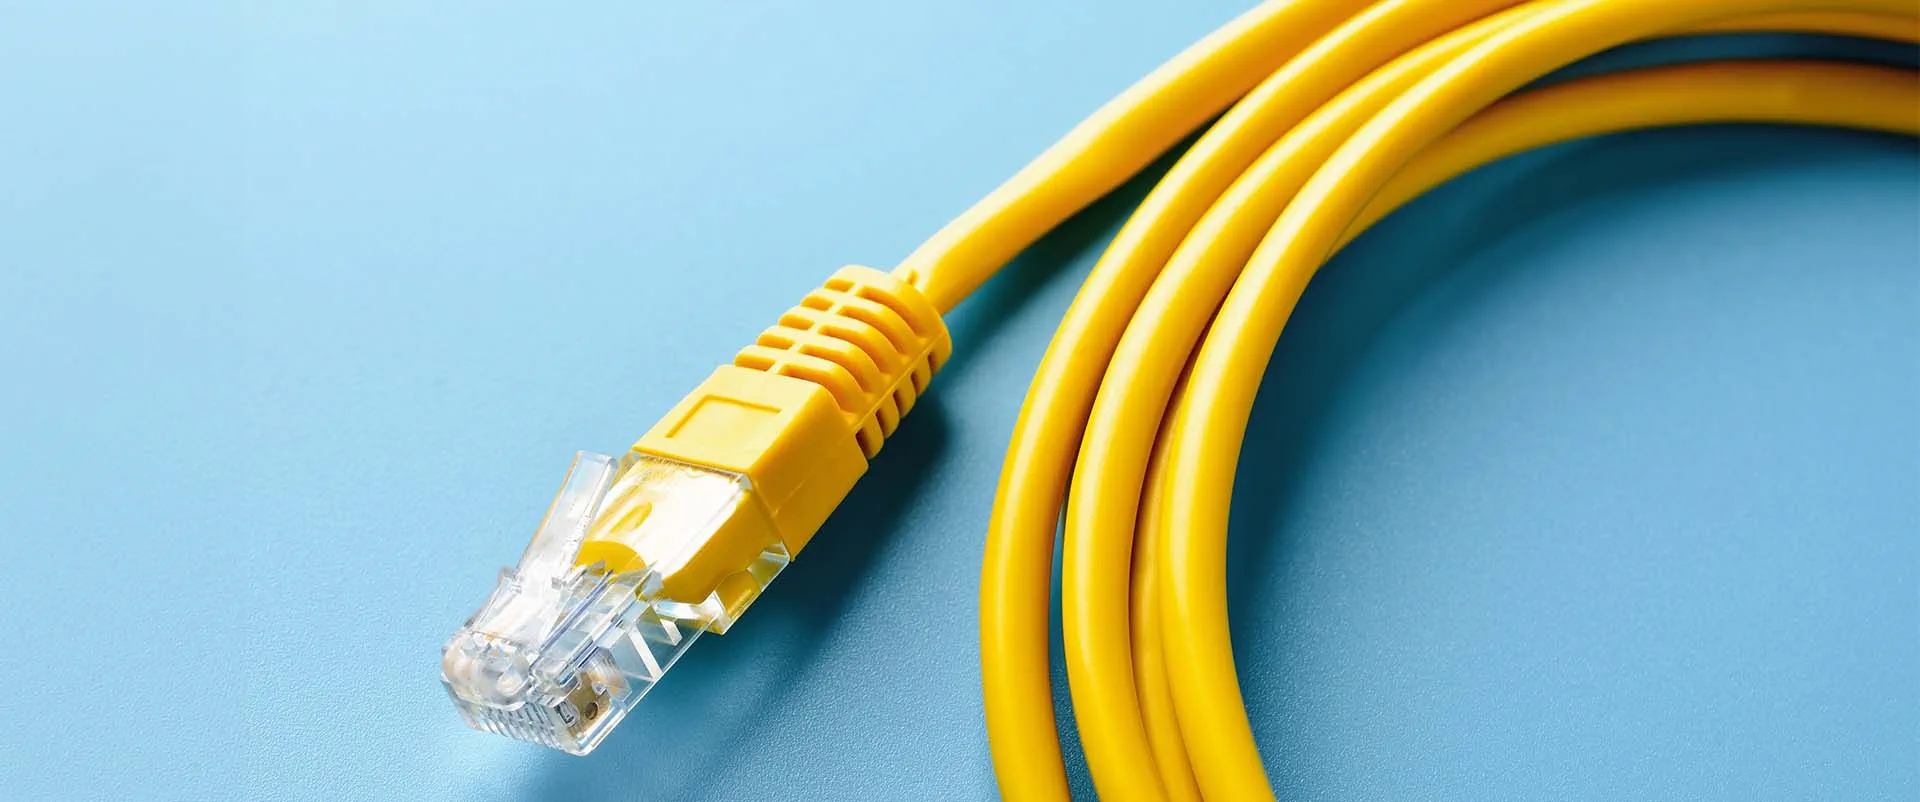 Close-up photo of a yellow ethernet cable used to connect computers and gaming consoles to a router or gateway 